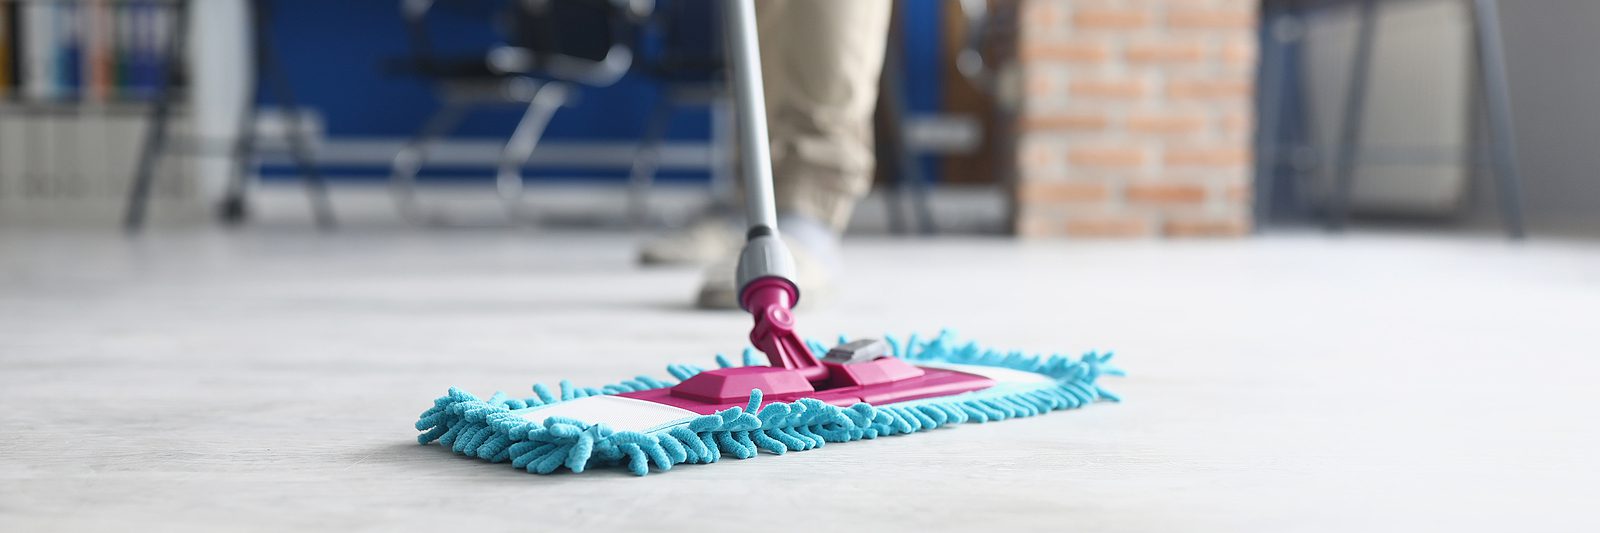 close up photo of a floor mop, cleaning service cleaning a classroom